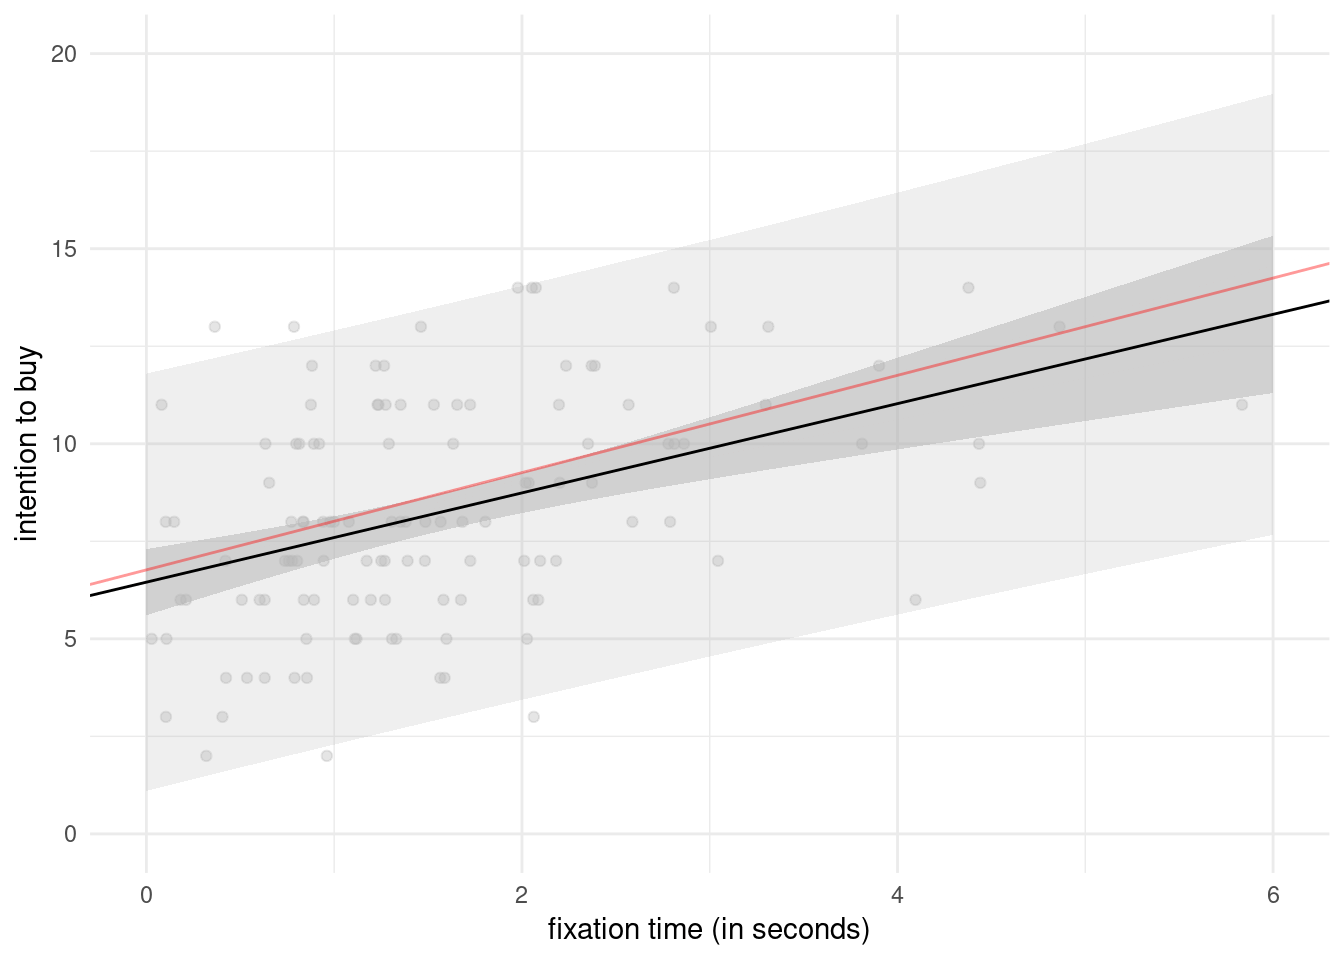 Prediction for the simple linear regression of buying intention as a function of fixation time. The plot shows predictions along with pointwise 95\% confidence intervals of the mean and the individual predictions.